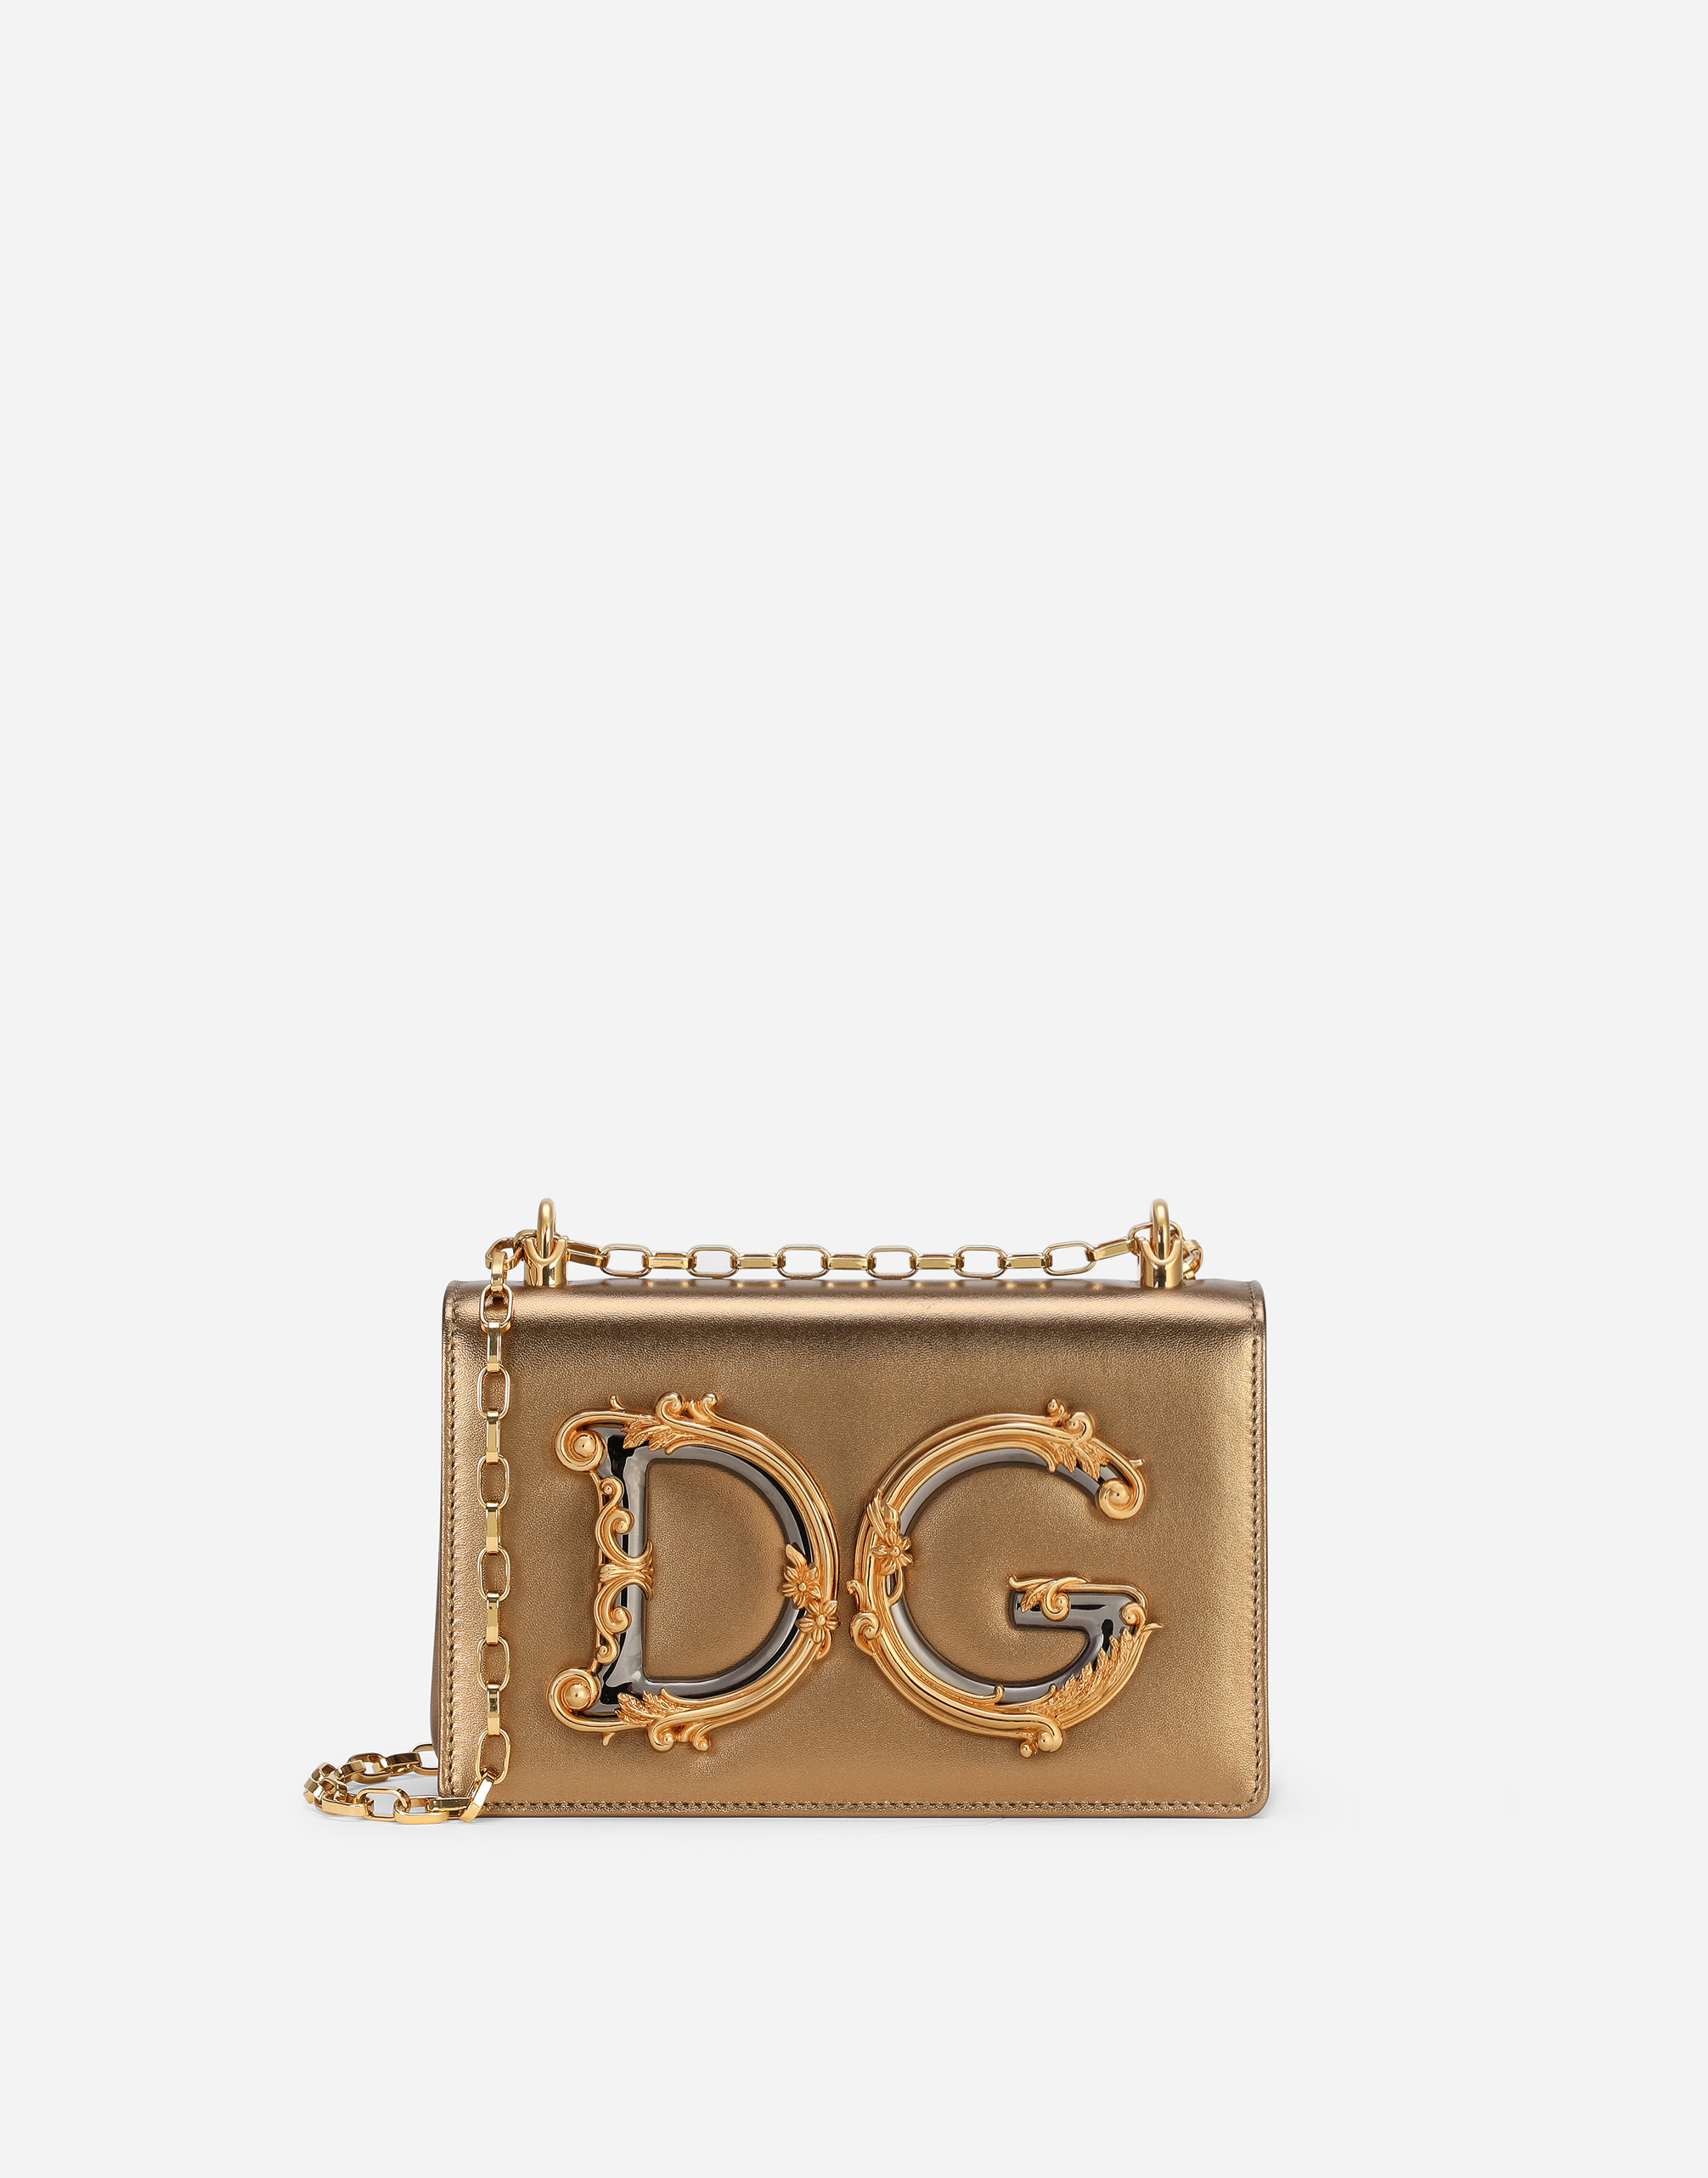 Nappa mordore leather DG Girls bag in Gold